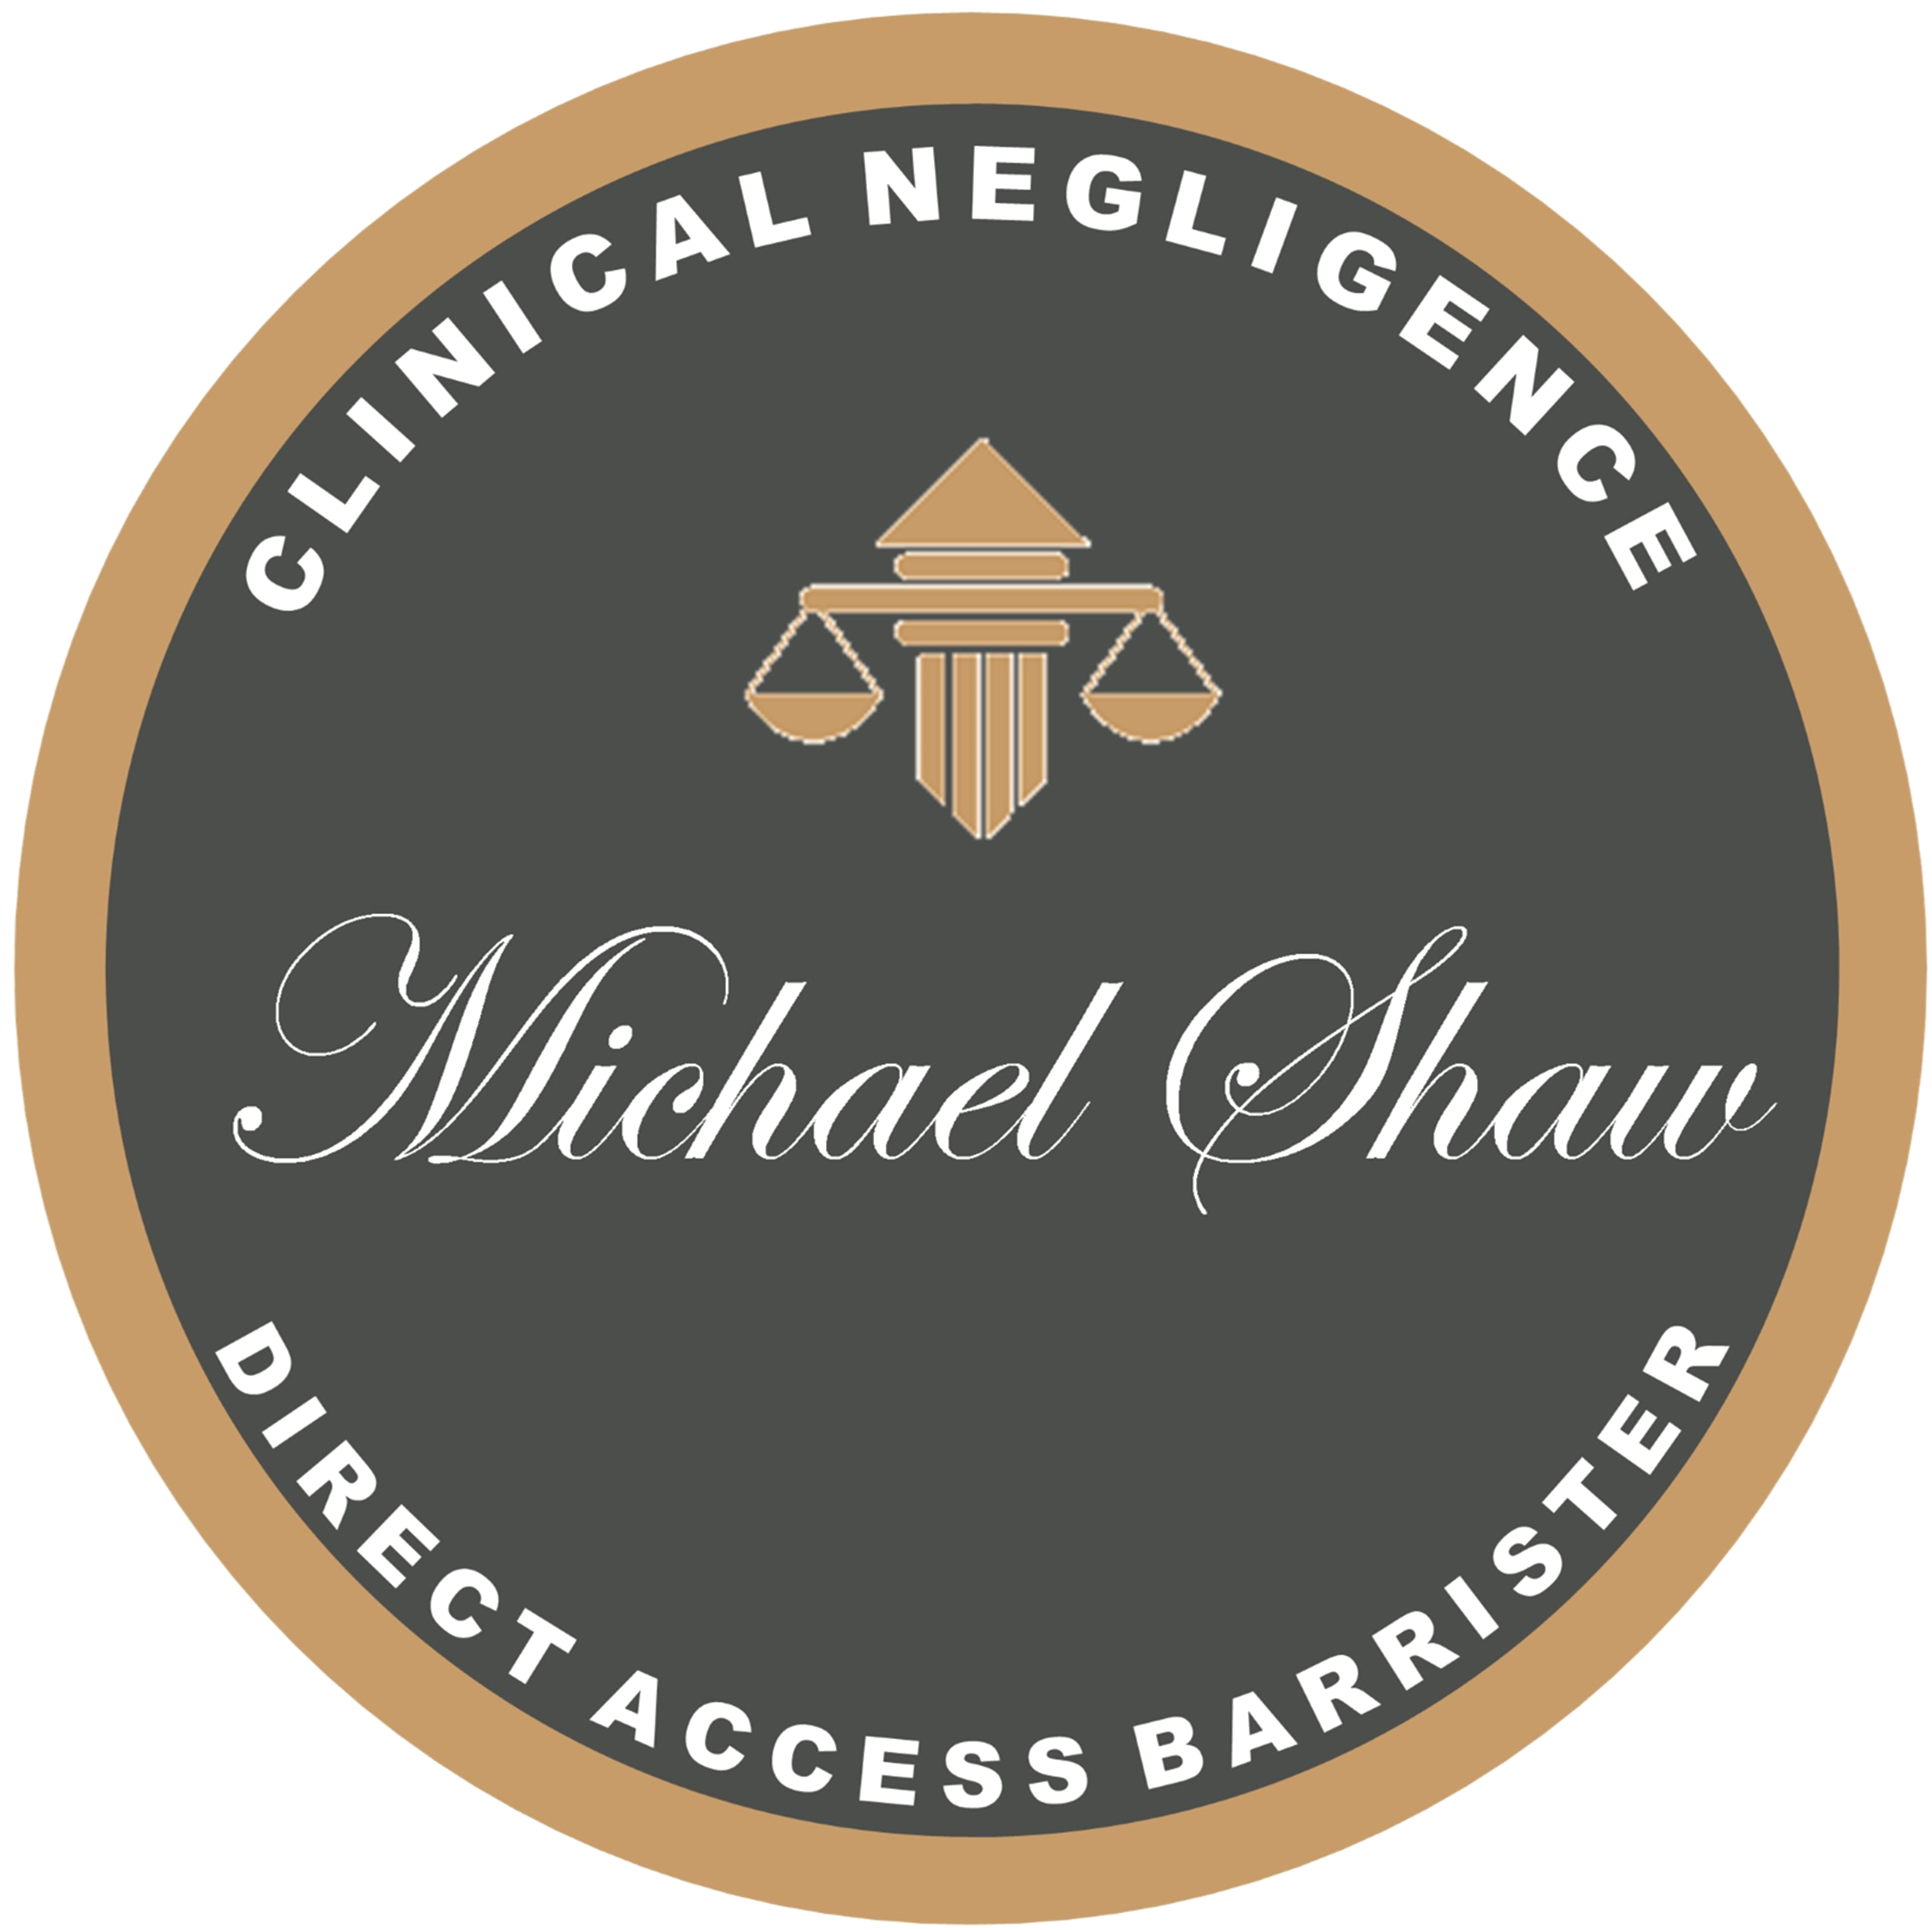 Michael Shaw - Direct Access Barrister - Logo - Transparent back - 09.05.24